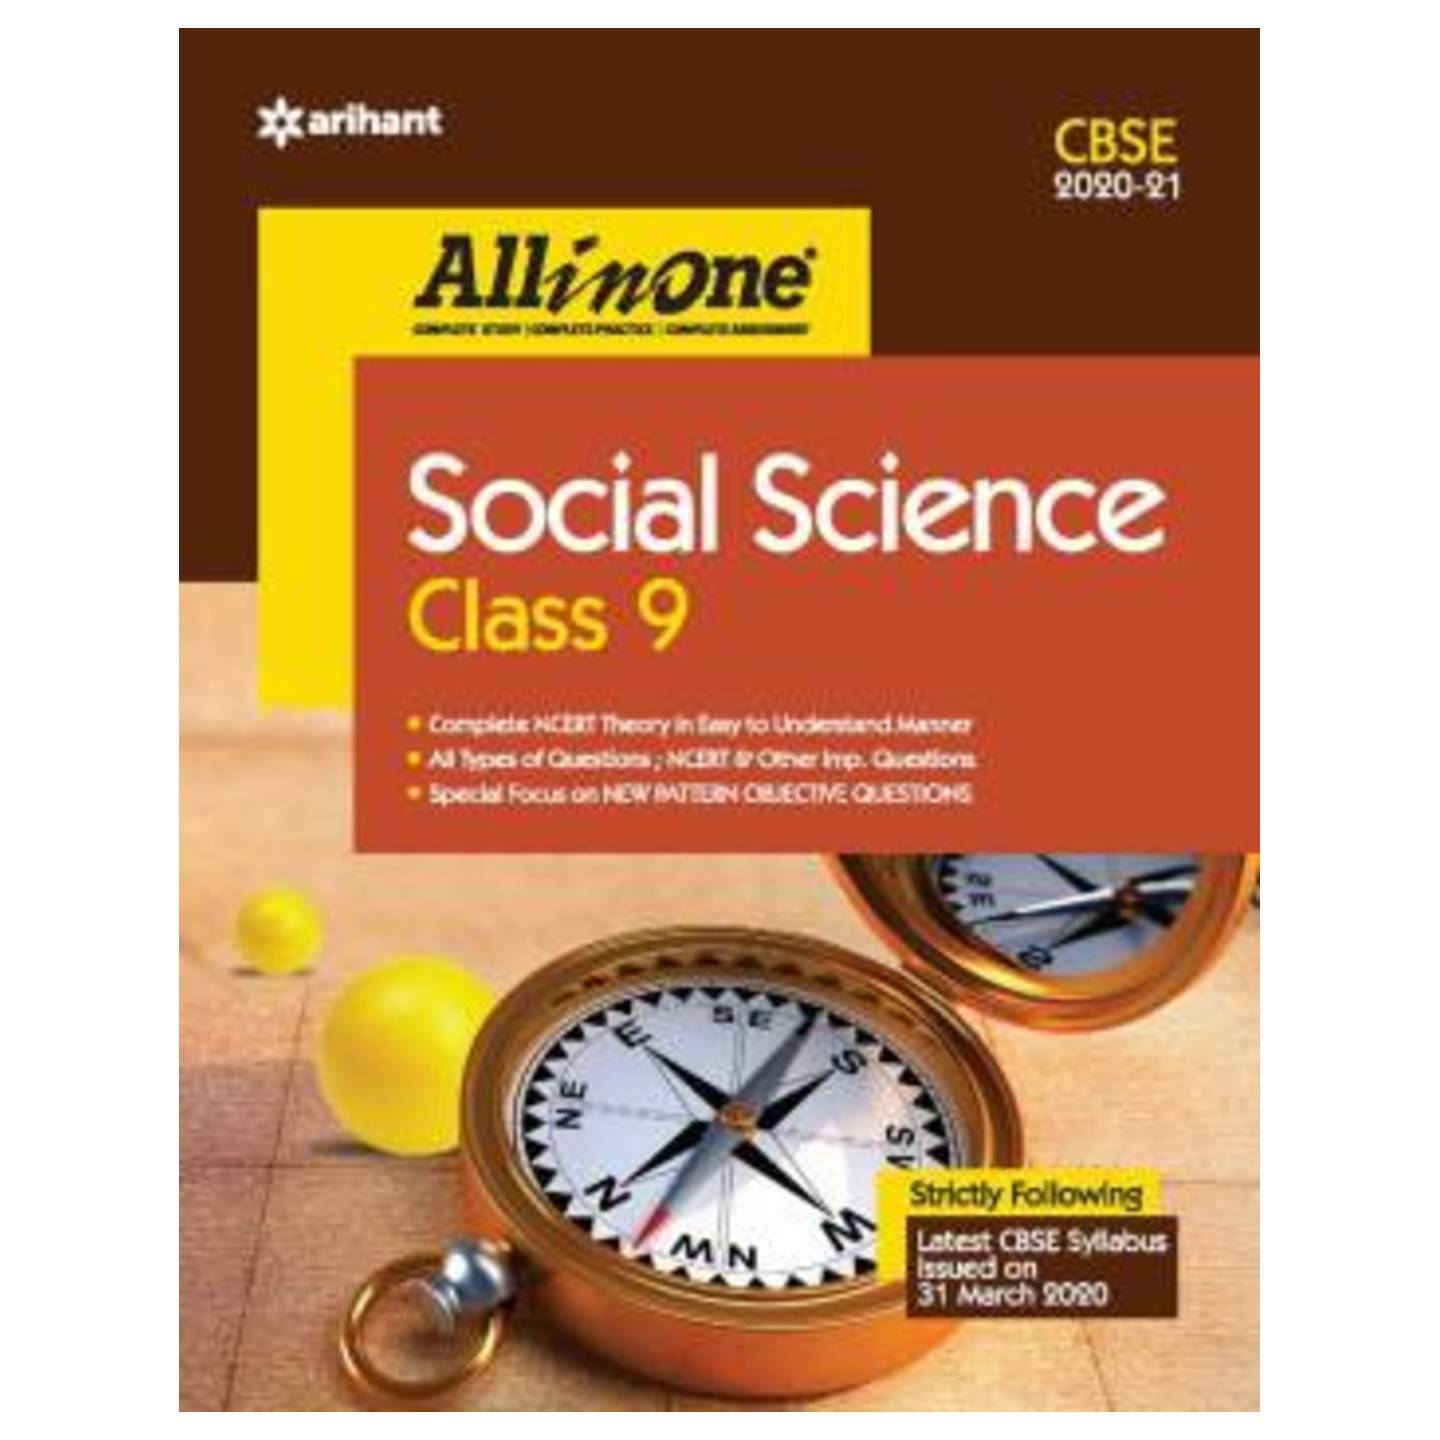 ARIHANT Cbse All in One Social Science Class 9